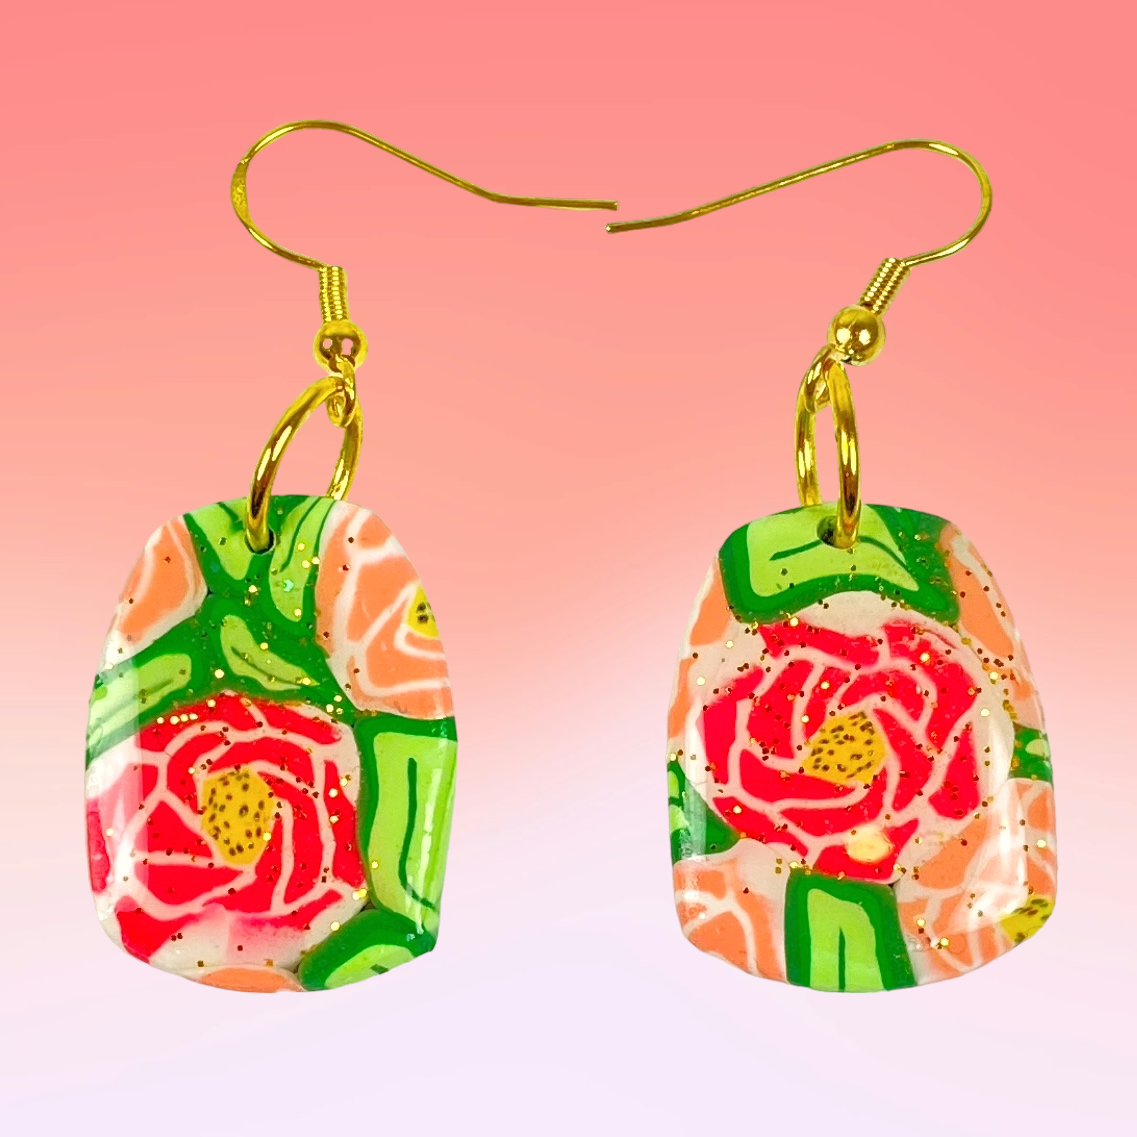 The Roses Handmade Polymer Clay Dangle Earrings on graduated pink backgroune